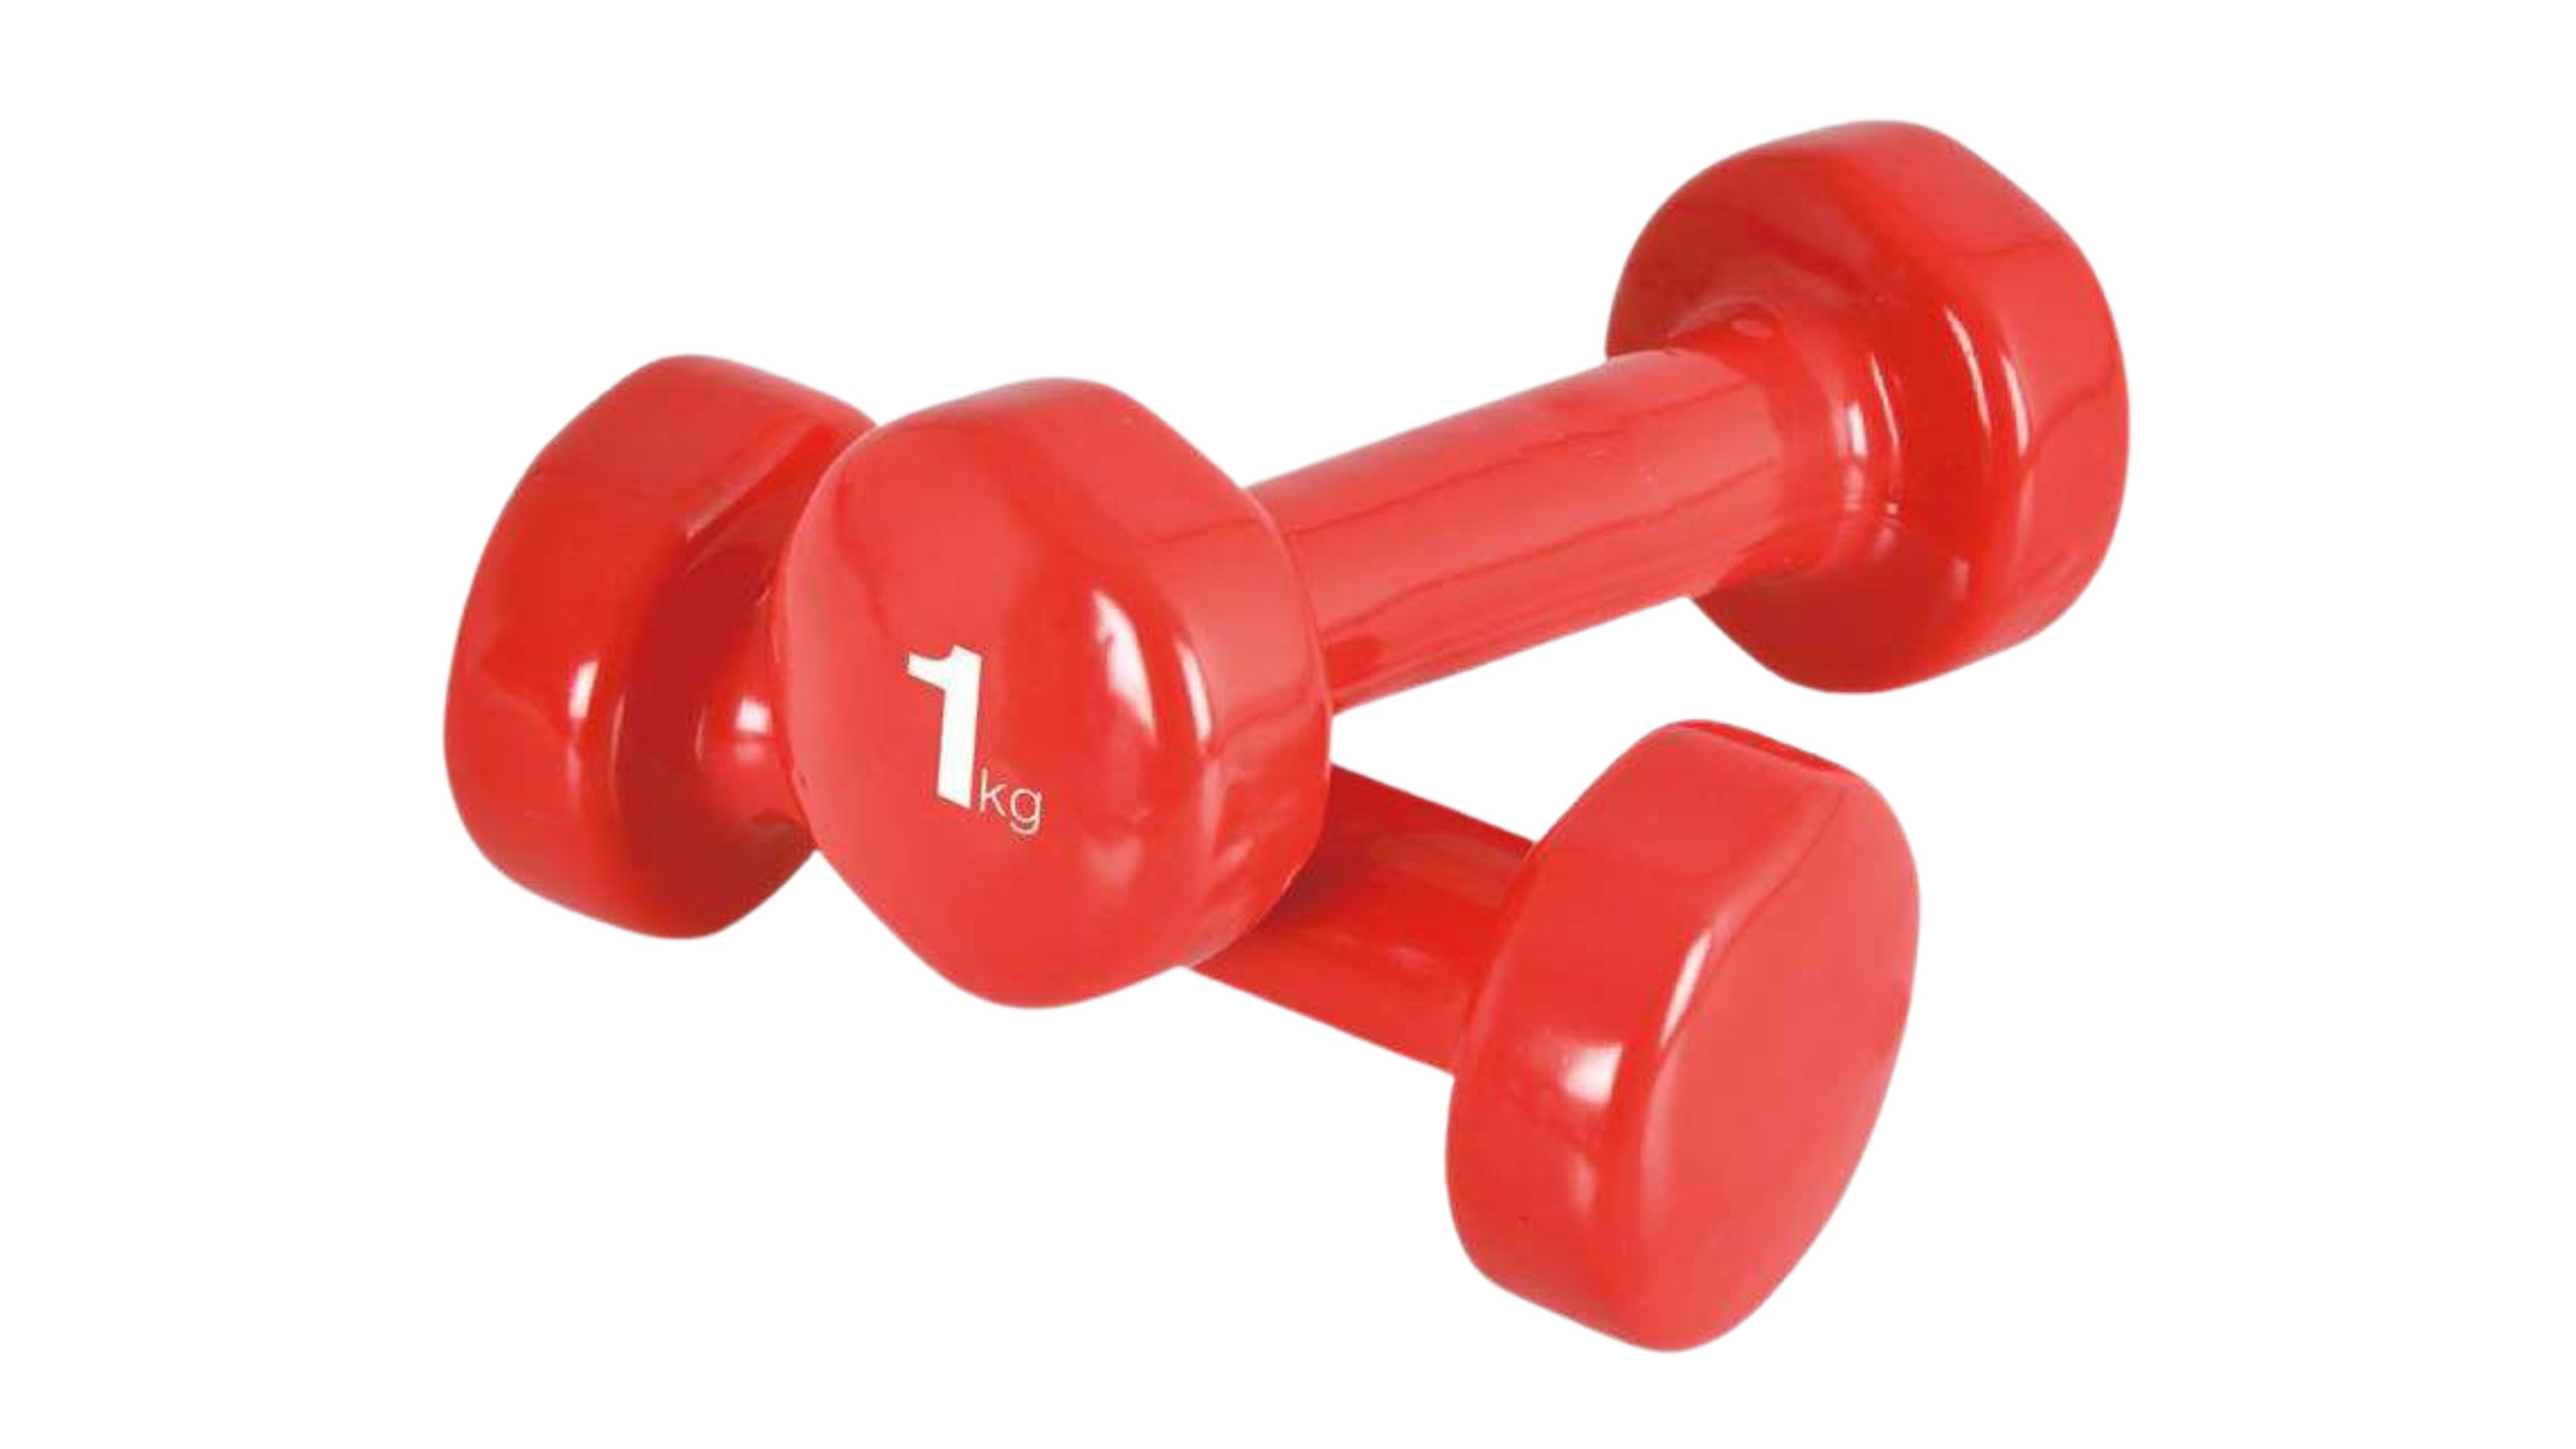 This dumbell can be used for different exercises to increase strength.